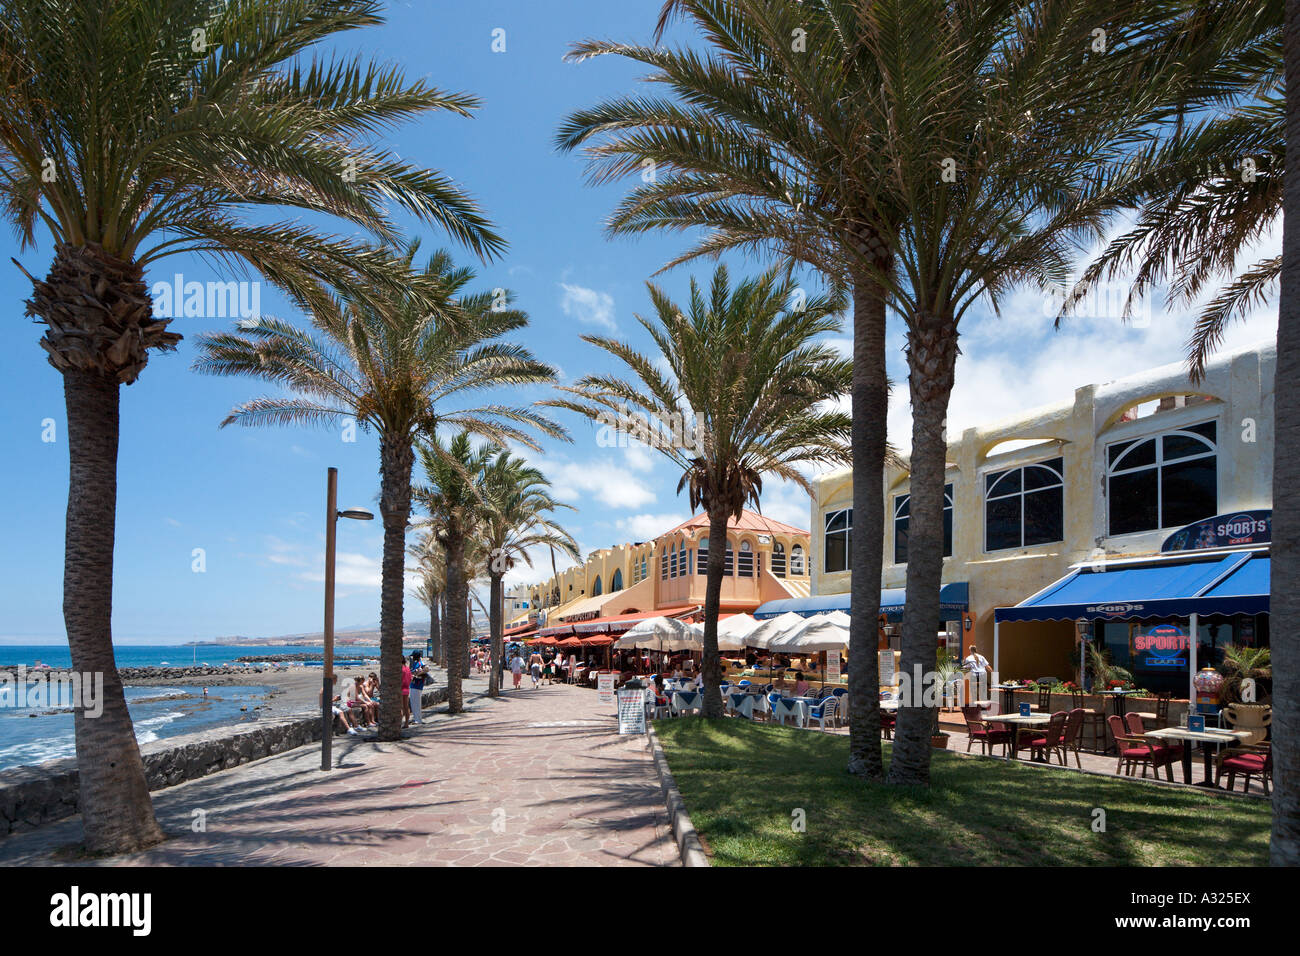 Seafront shops & cafes at Las Veronicas shopping and entertainment complex, Playa de las Americas, Tenerife, Canary Islands Stock Photo